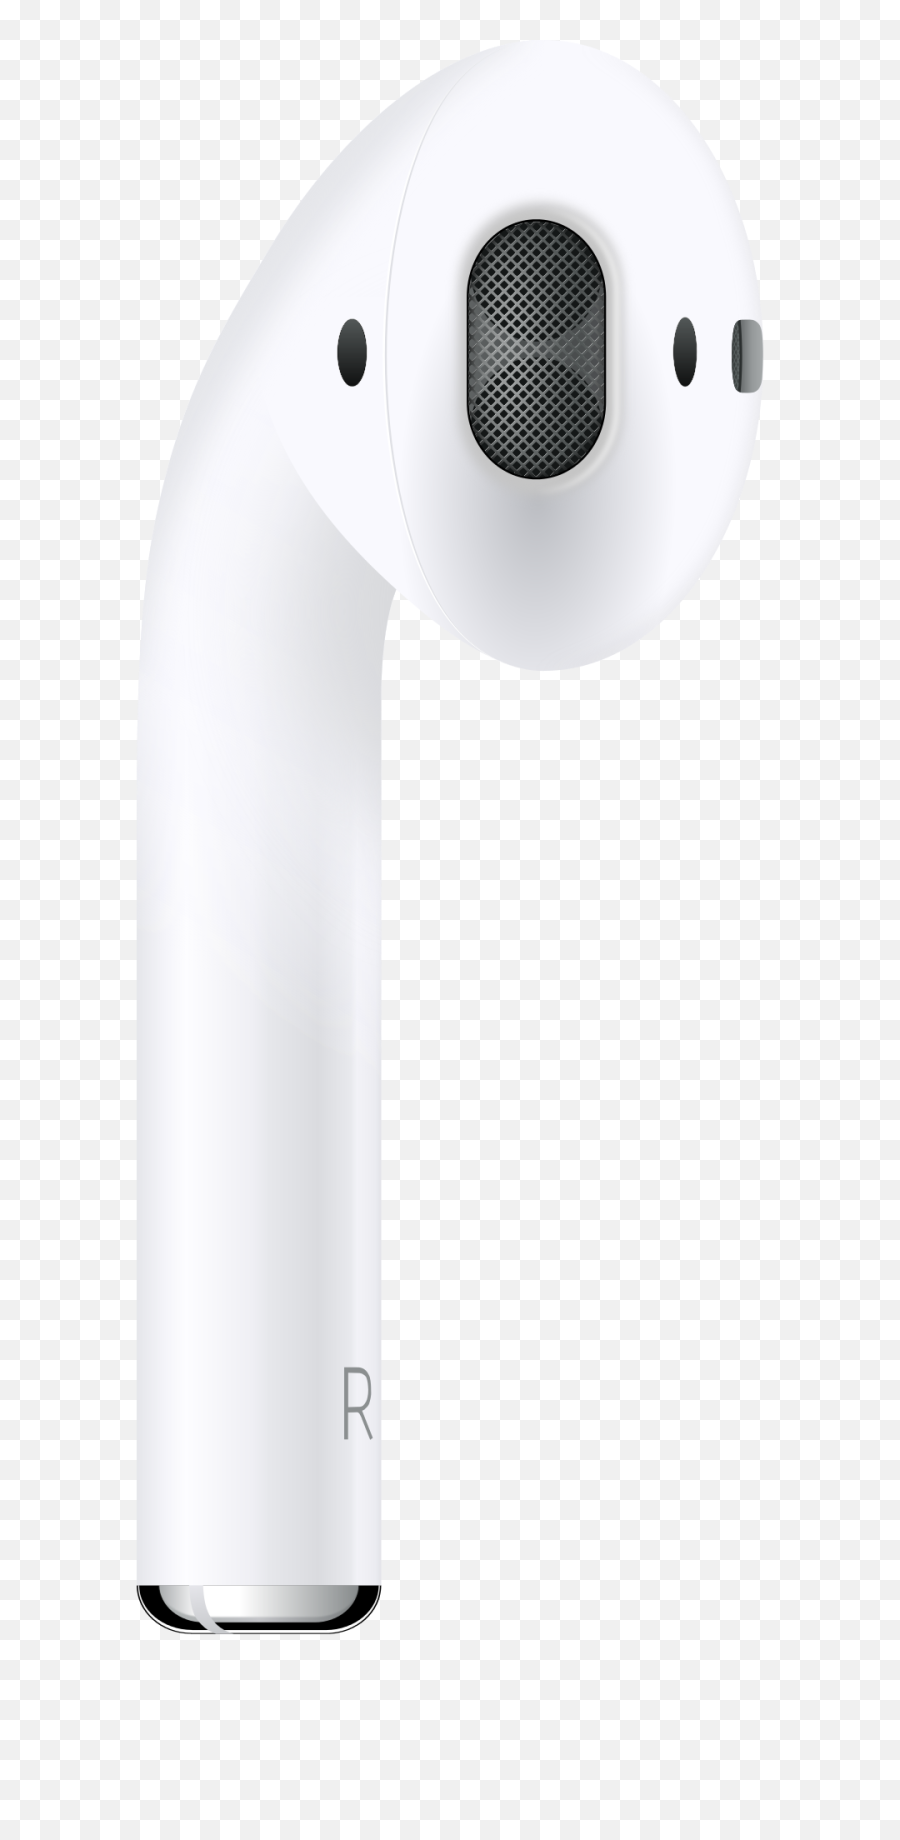 Apple Airpods Airpod Earpod Png Image - Transparent Transparent Background Png Airpods Transparent,Airpods Transparent Png